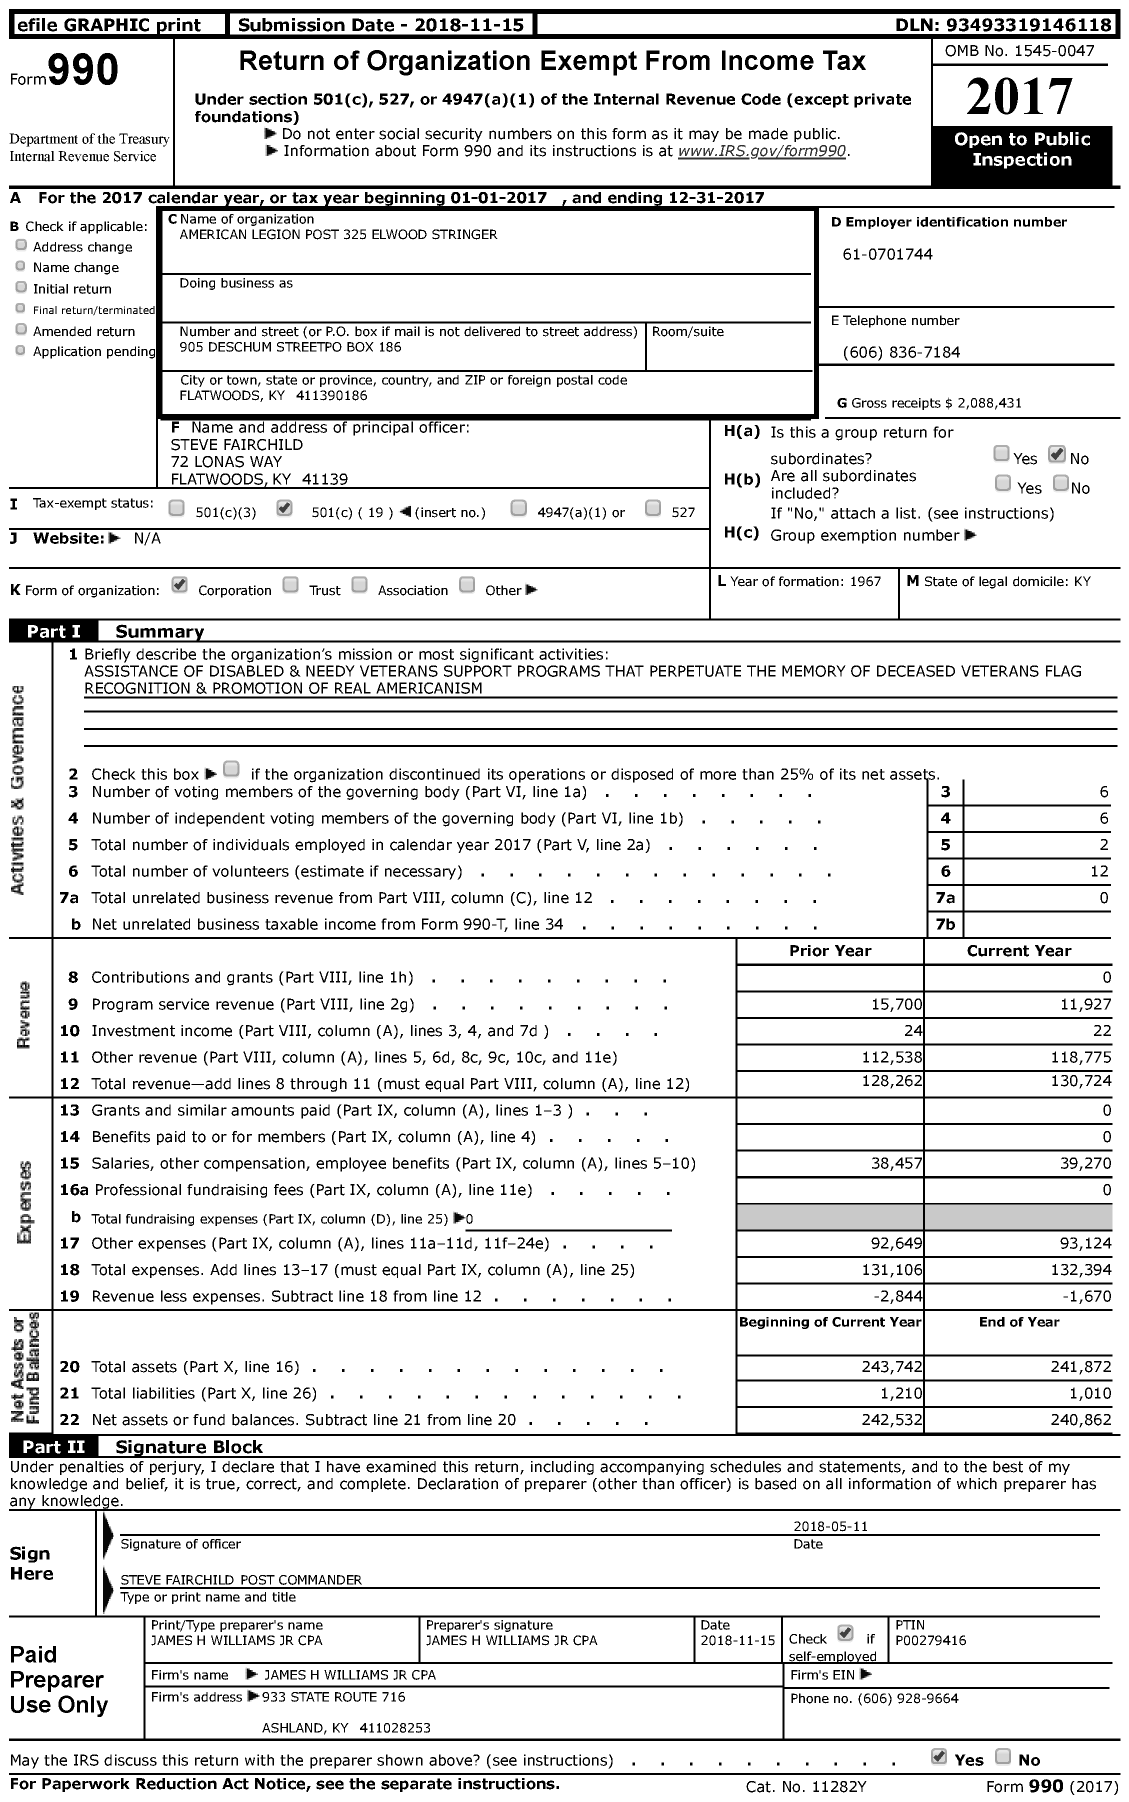 Image of first page of 2017 Form 990 for American Legion - 0325 Elwood Stringer